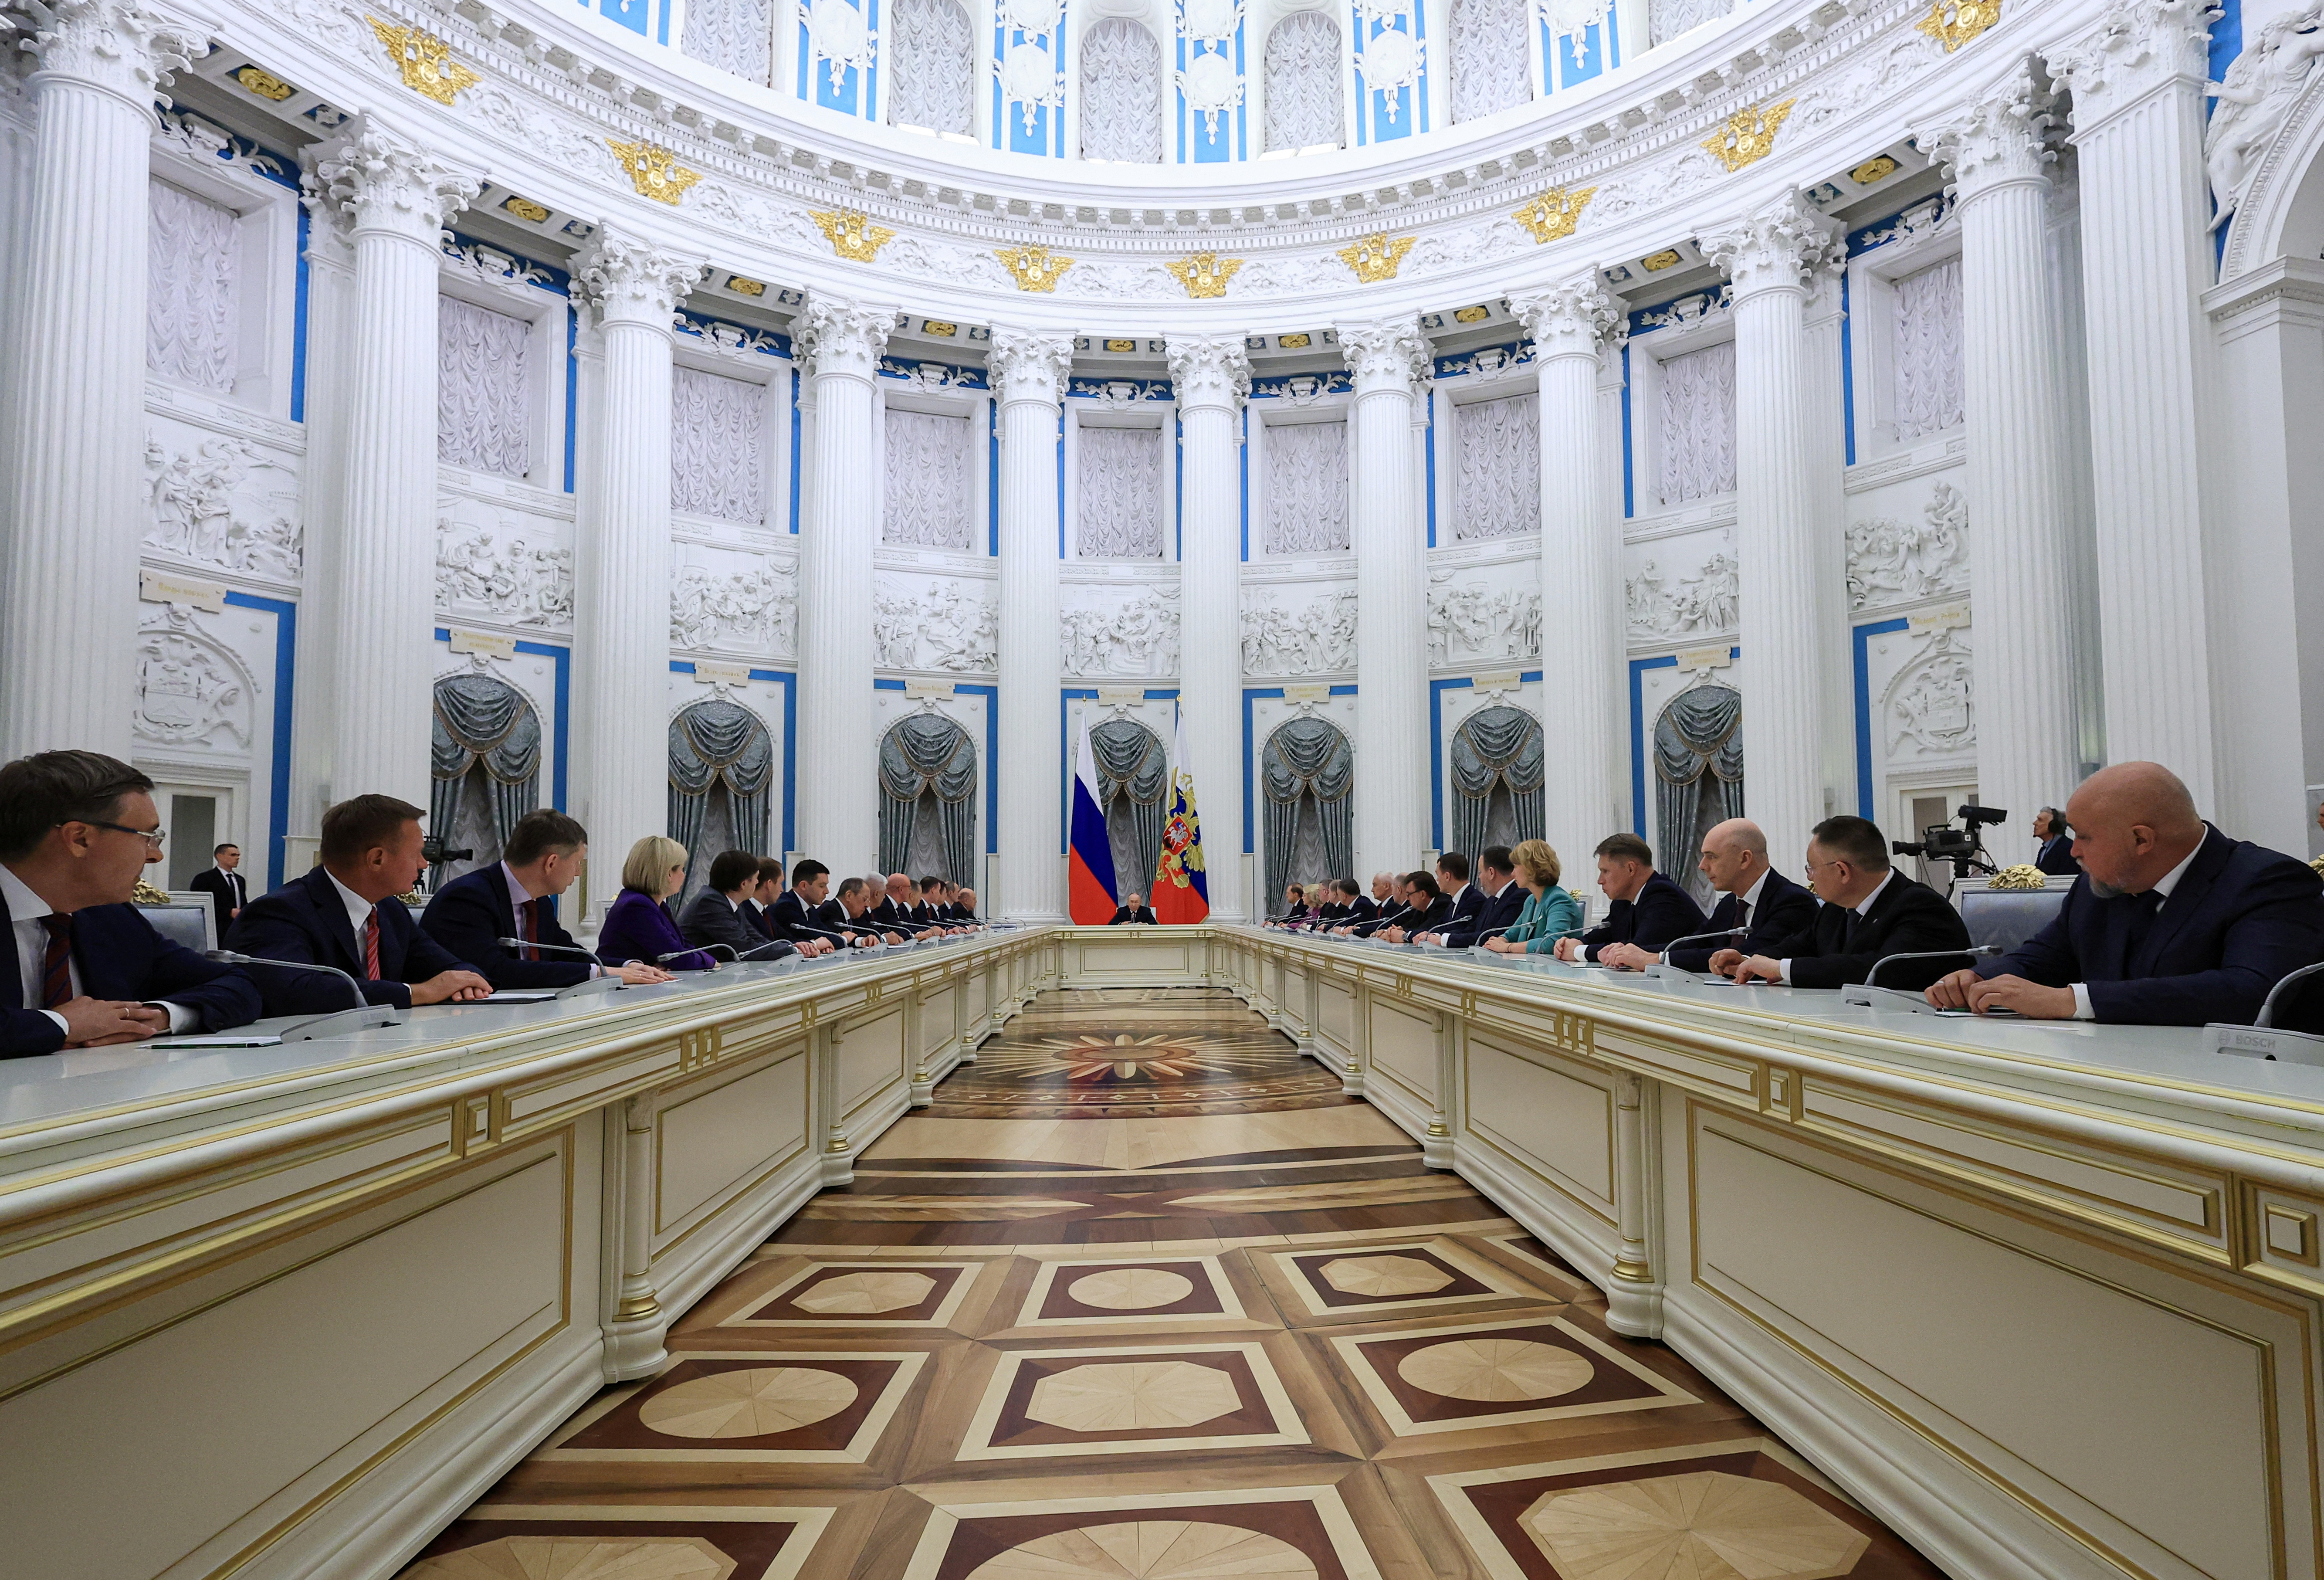 Russian President Putin chairs a meeting with members of the new government in Moscow